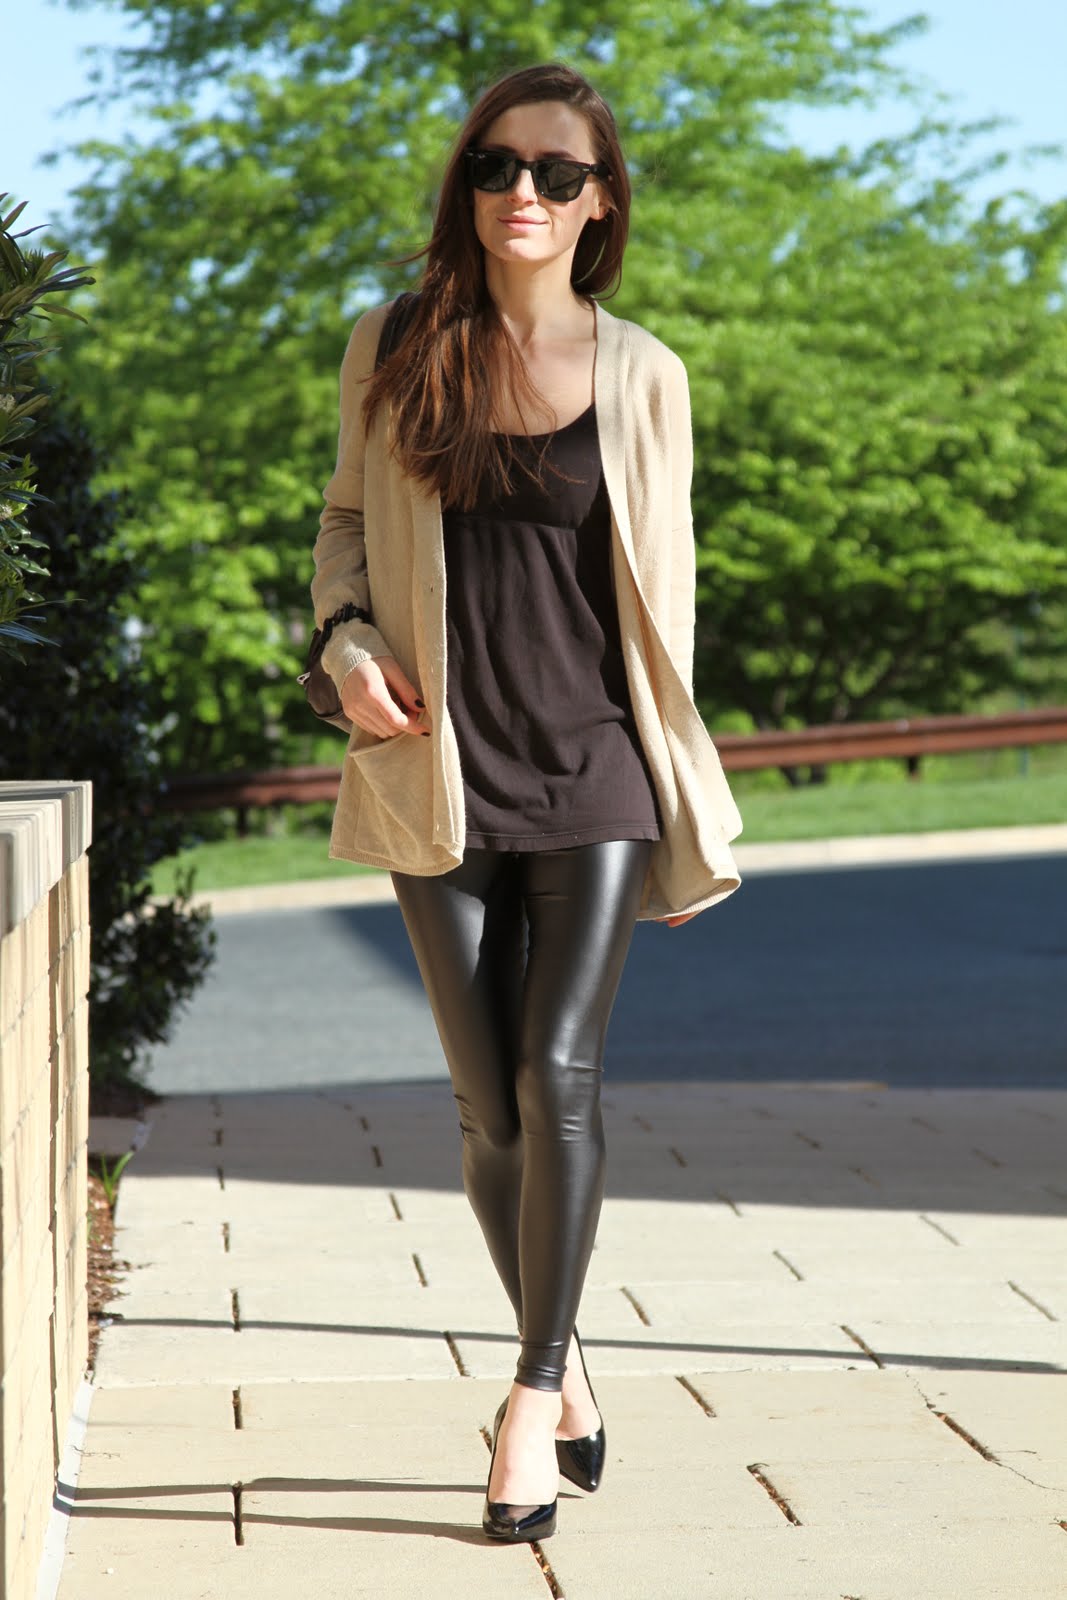 Classy and fabulous Casual Relaxed Chic